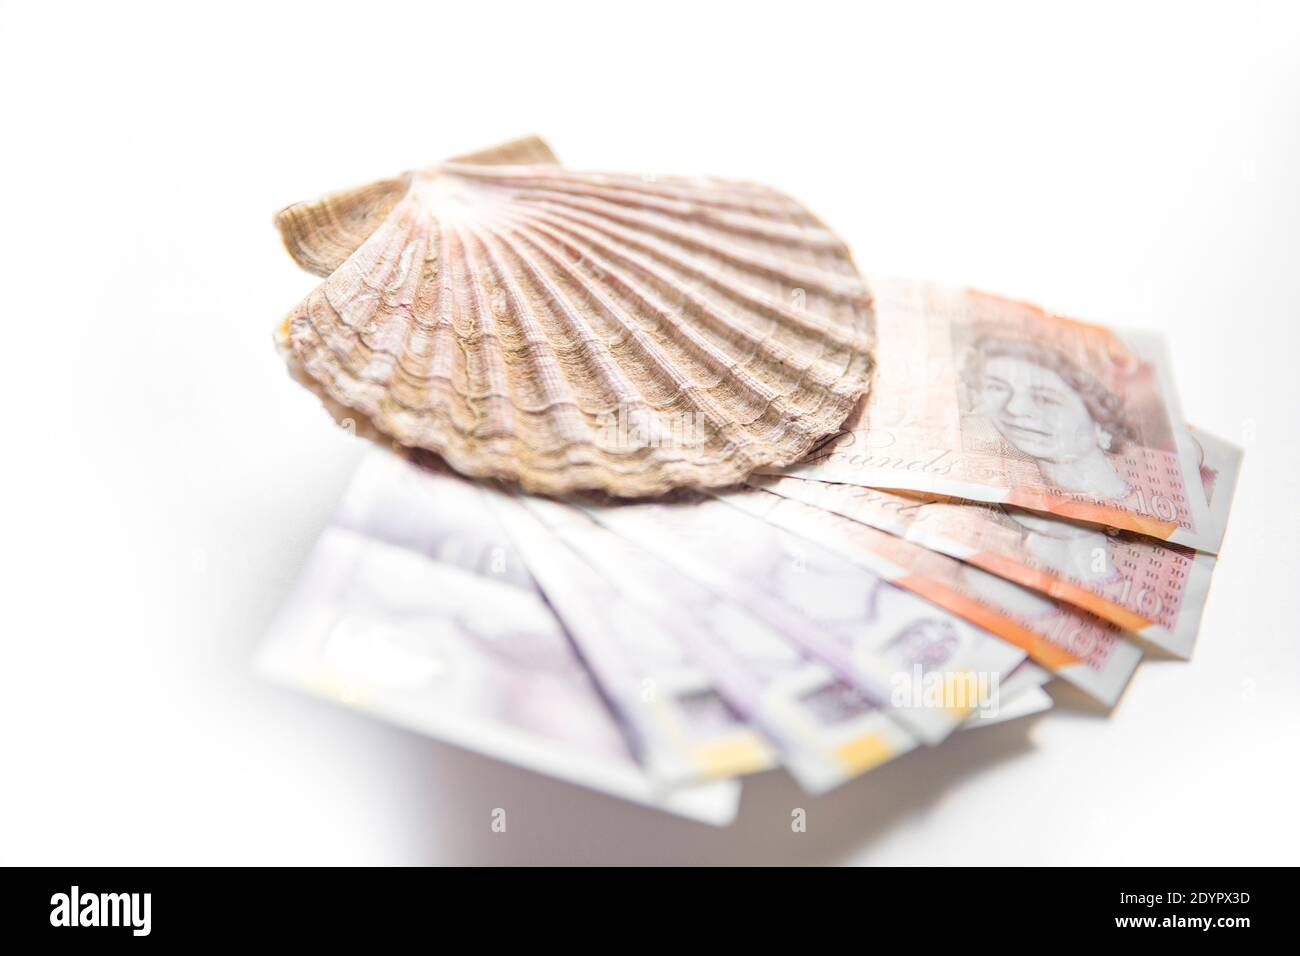 A king scallop shell, P. maximus with ten and twenty pound notes. Concept Brexit picture for value of the UK shellfish/fishing industry. England UK GB Stock Photo